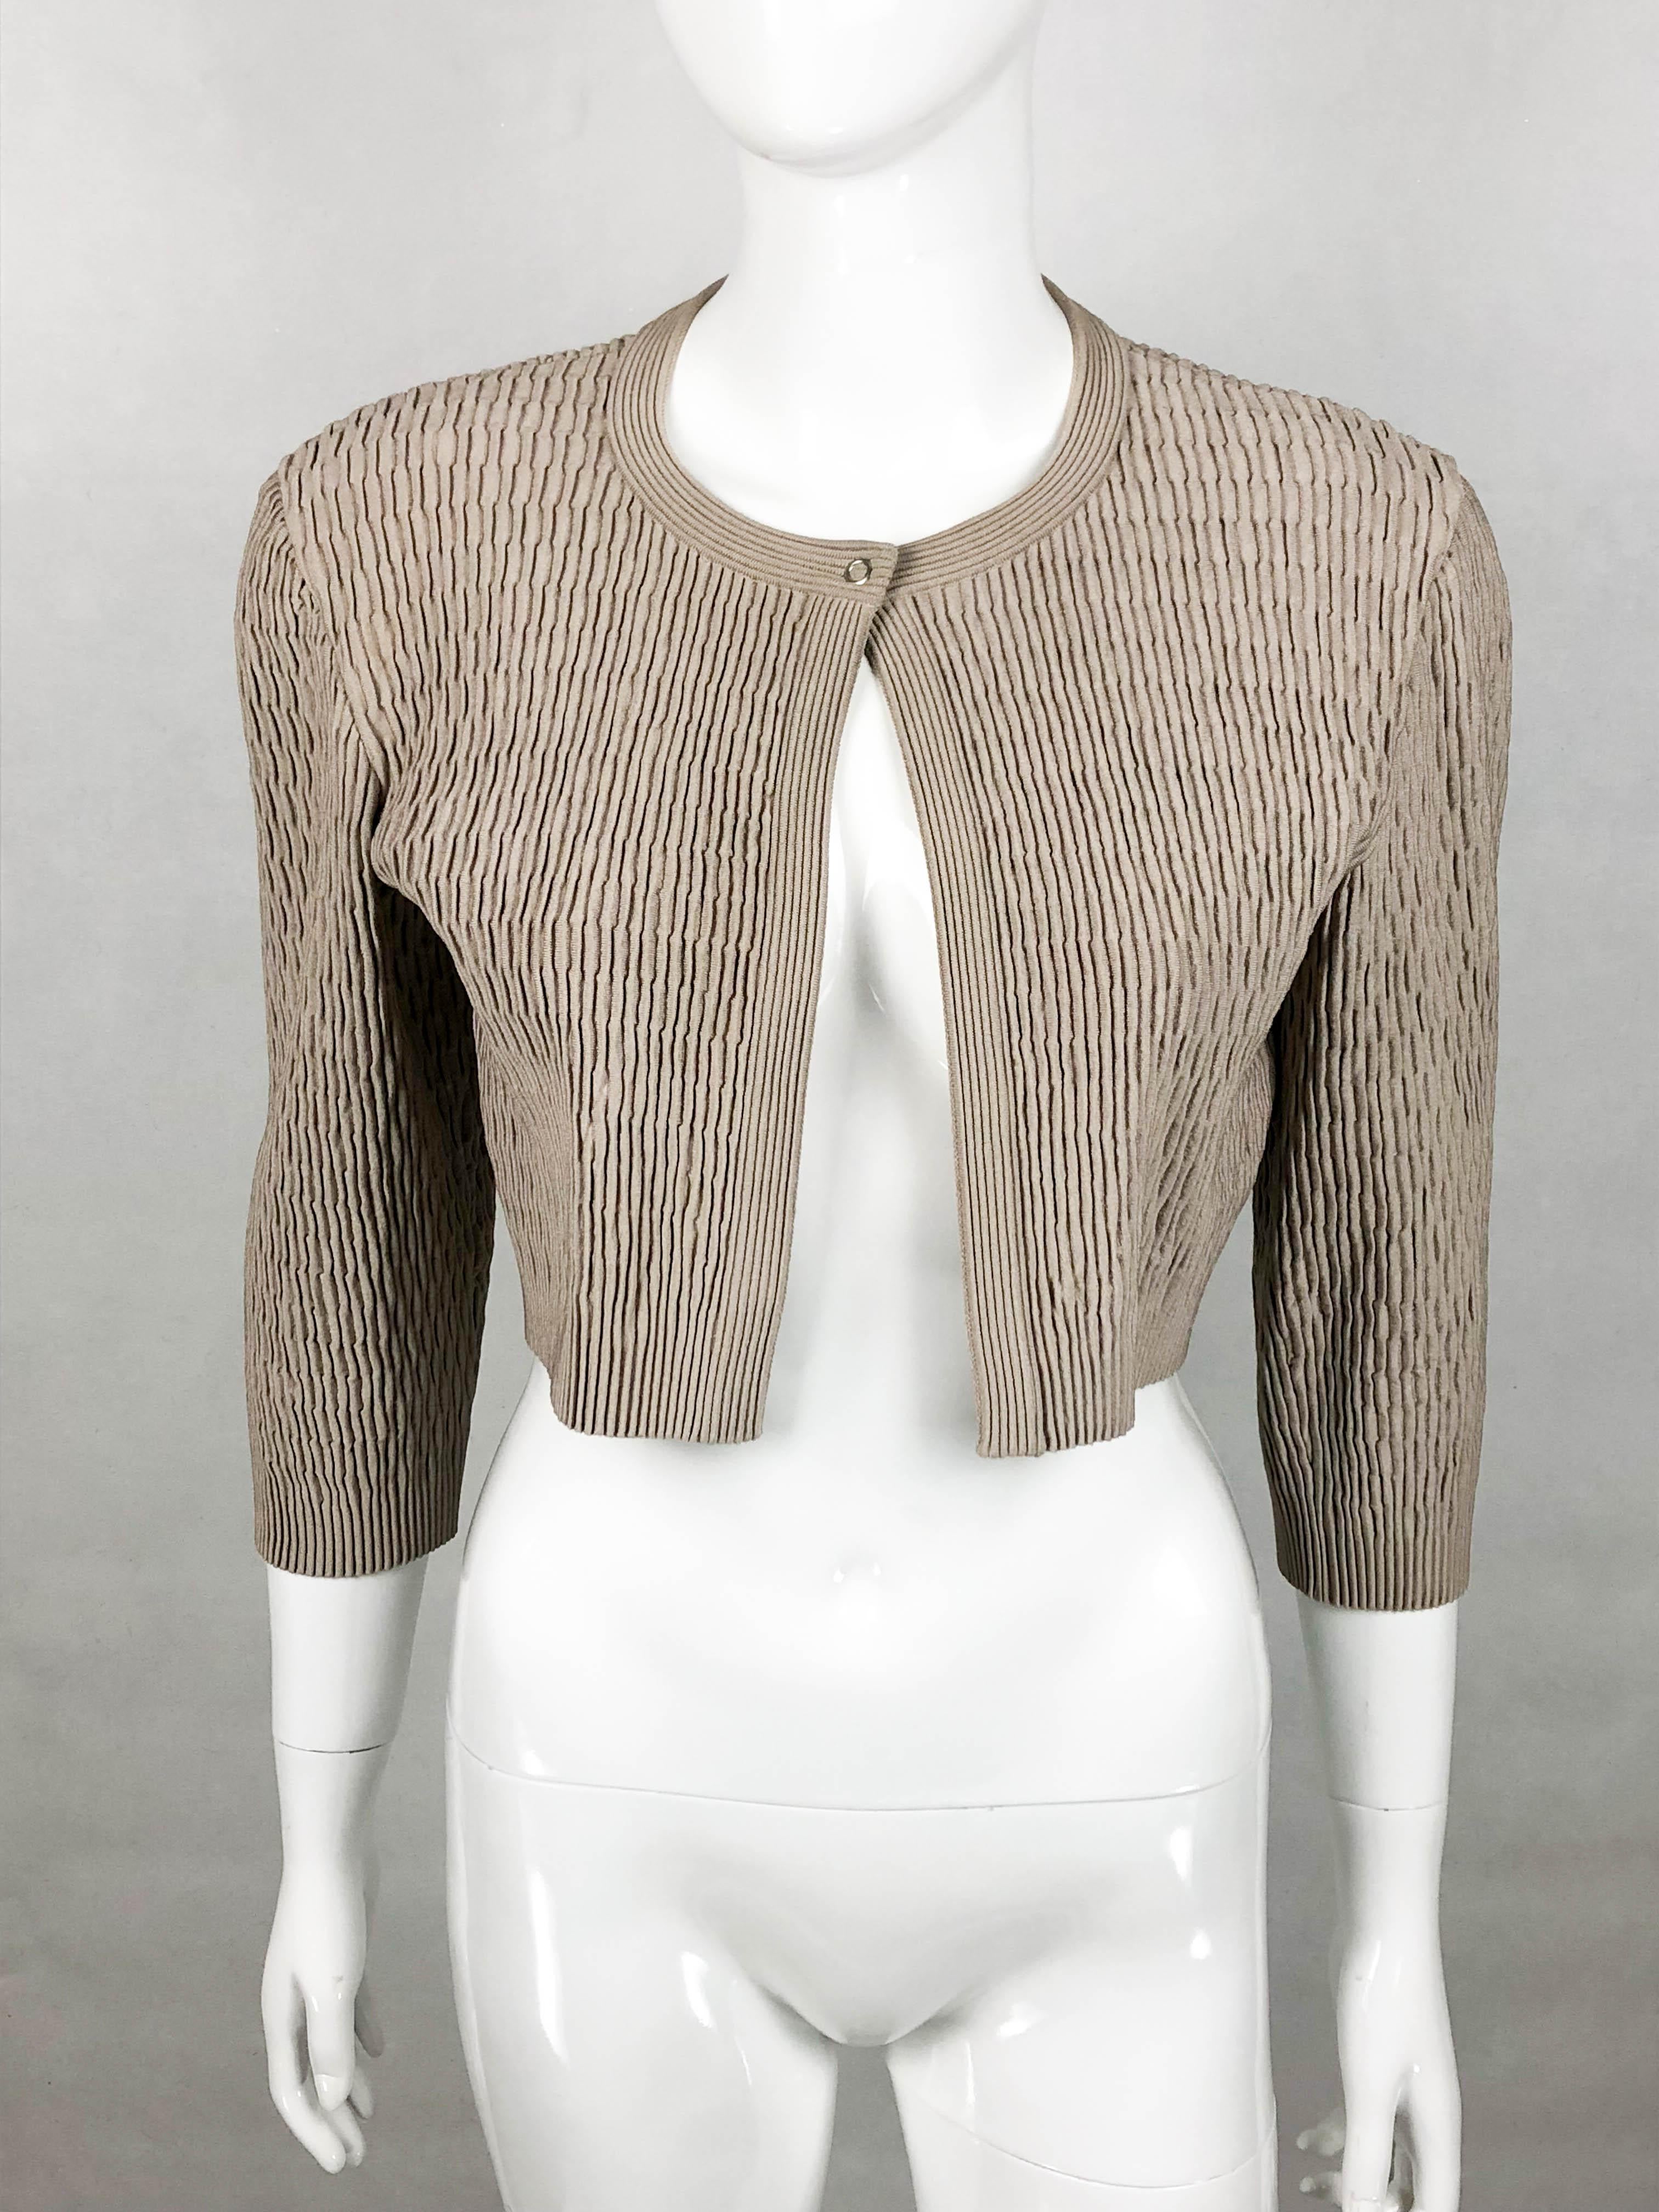 Vintage Alaia Taupe Stretch Jacket. This very cute jacket by Azzedine Alaia dates back from the early 2000’s. This cropped jacket of gathered design features ¾ sleeves and a pressure button at the collar. Flattering and versatile, this is the